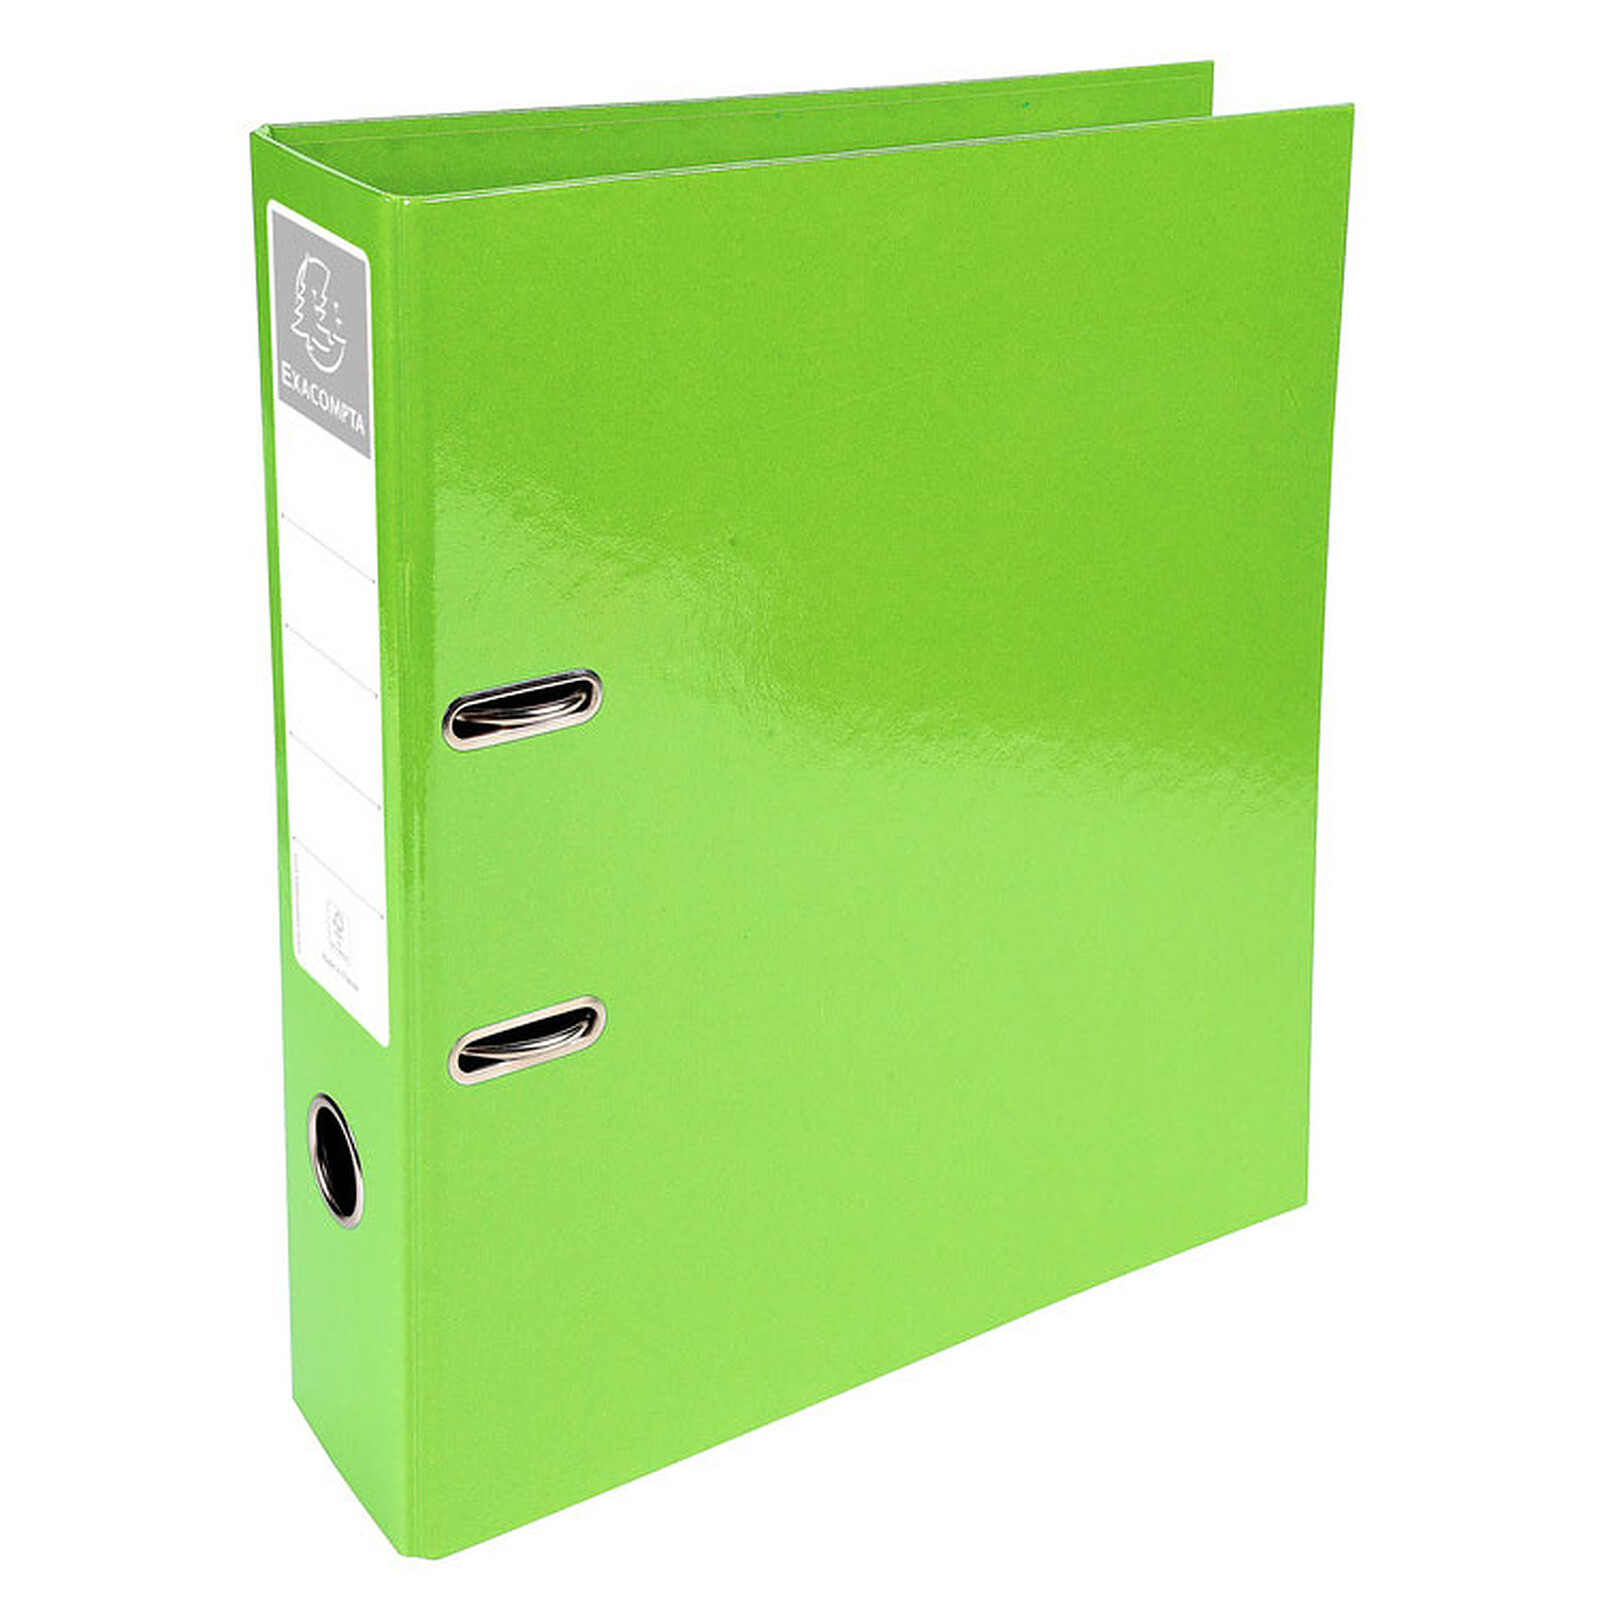 RING BINDER FILES FOLDERS 2 RINGS OFFICE HOME FILES STORAGE A4 x 3 